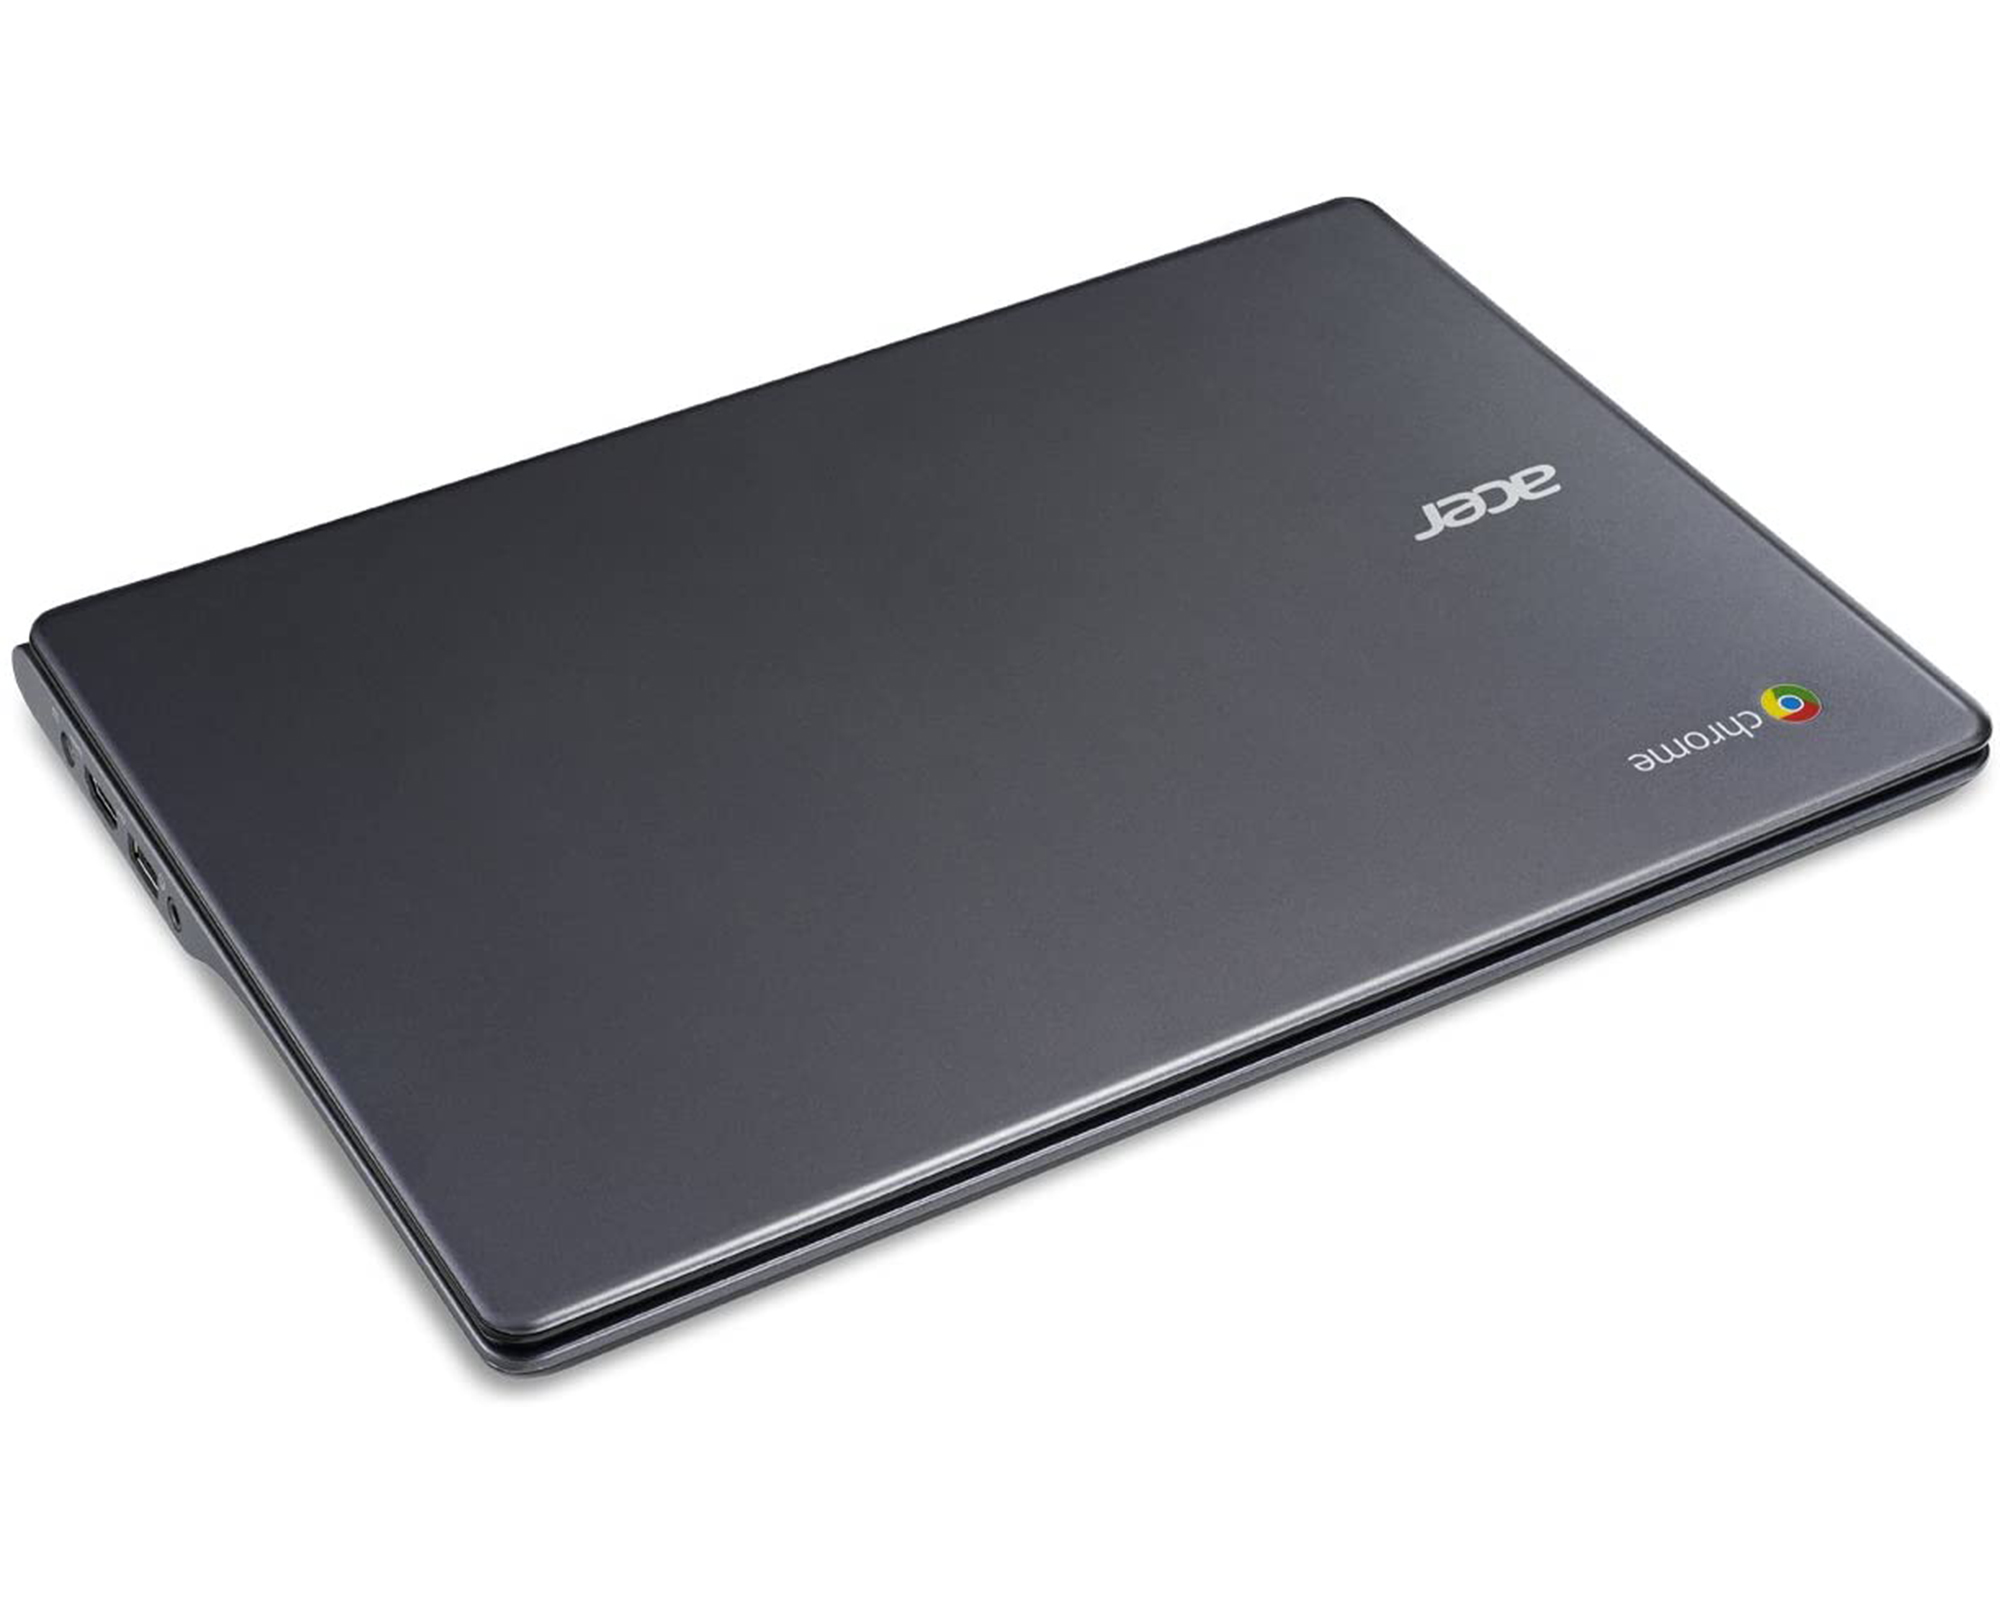 Restored Details about Acer C720-2103 11.6 in chromebook, Intel Celeron 1.4GHz 2GB Ram - image 7 of 8